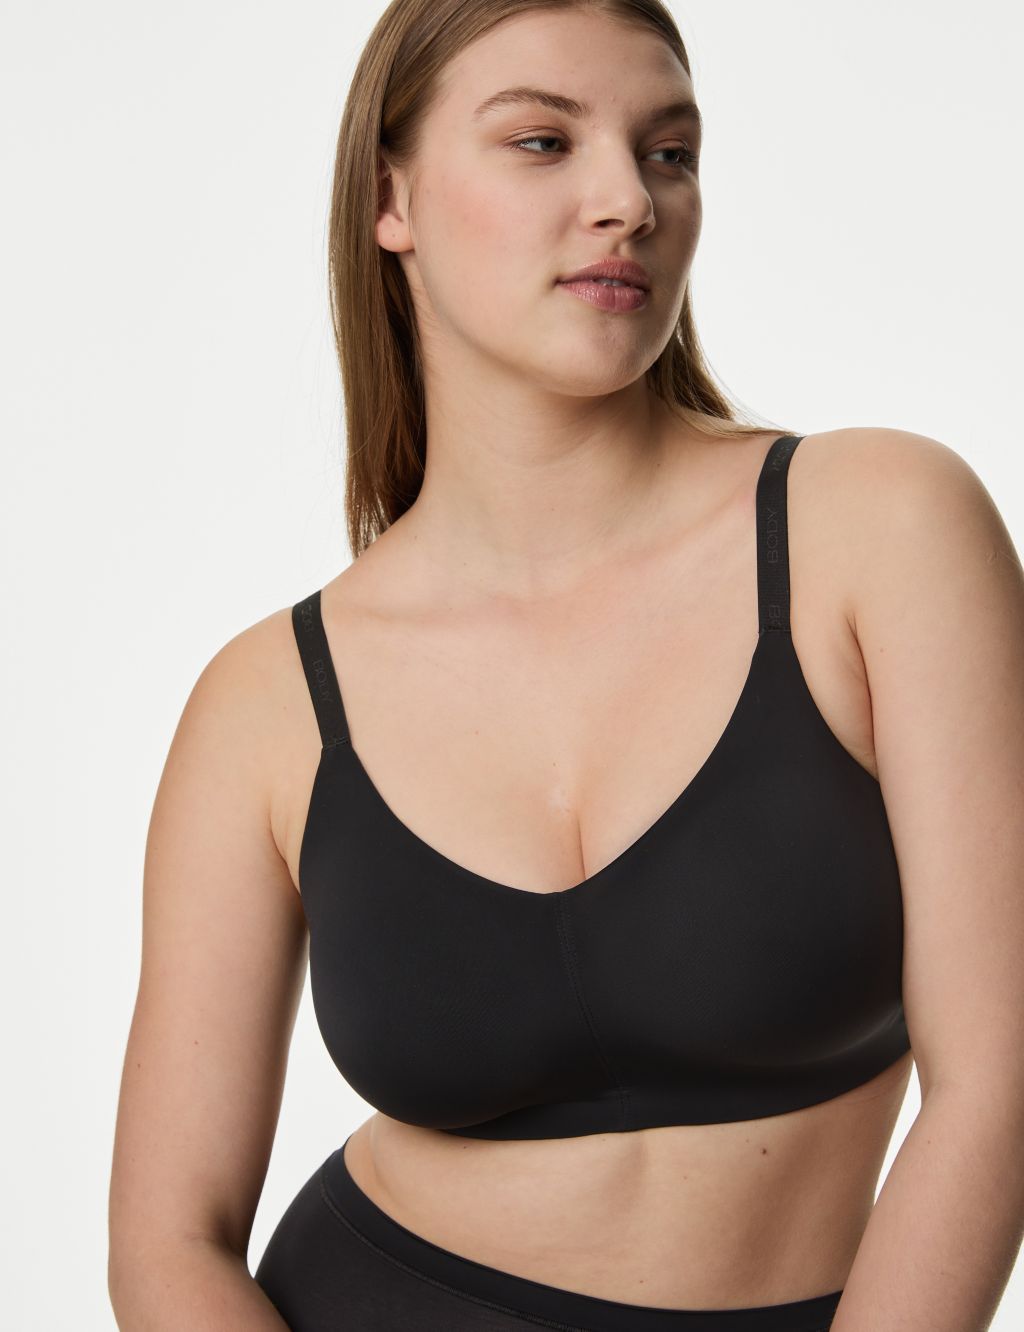 Sleep Bras by M&S, Bras and bedtime are BFFs when you wear the FlexiFit™ Sleep  Bra that brings you full support without the wires! Product Code: T33/7161  #MandS #SleepBra